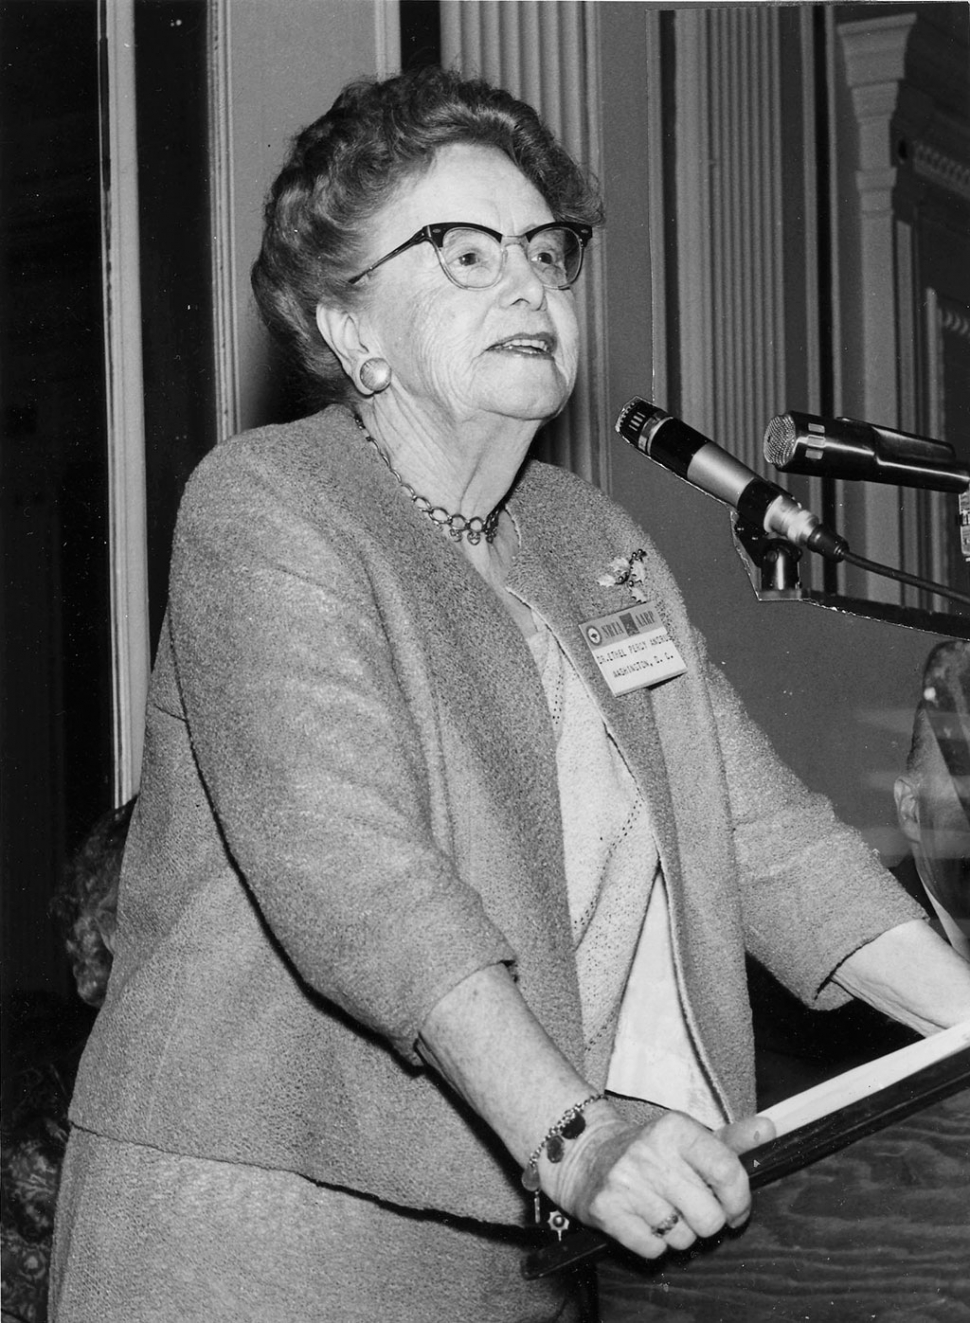 DR. ETHEL PERCY ANDRUS: Educator, Social Innovator, Humanitarian - Dr. Ethel Percy Andrus, Founder and President of NRTA-AARP, testifying before the Kefauver Committee on Hearing Aids, April 19, 1962.
Courtesy of: Ojai Valley Museum Archives